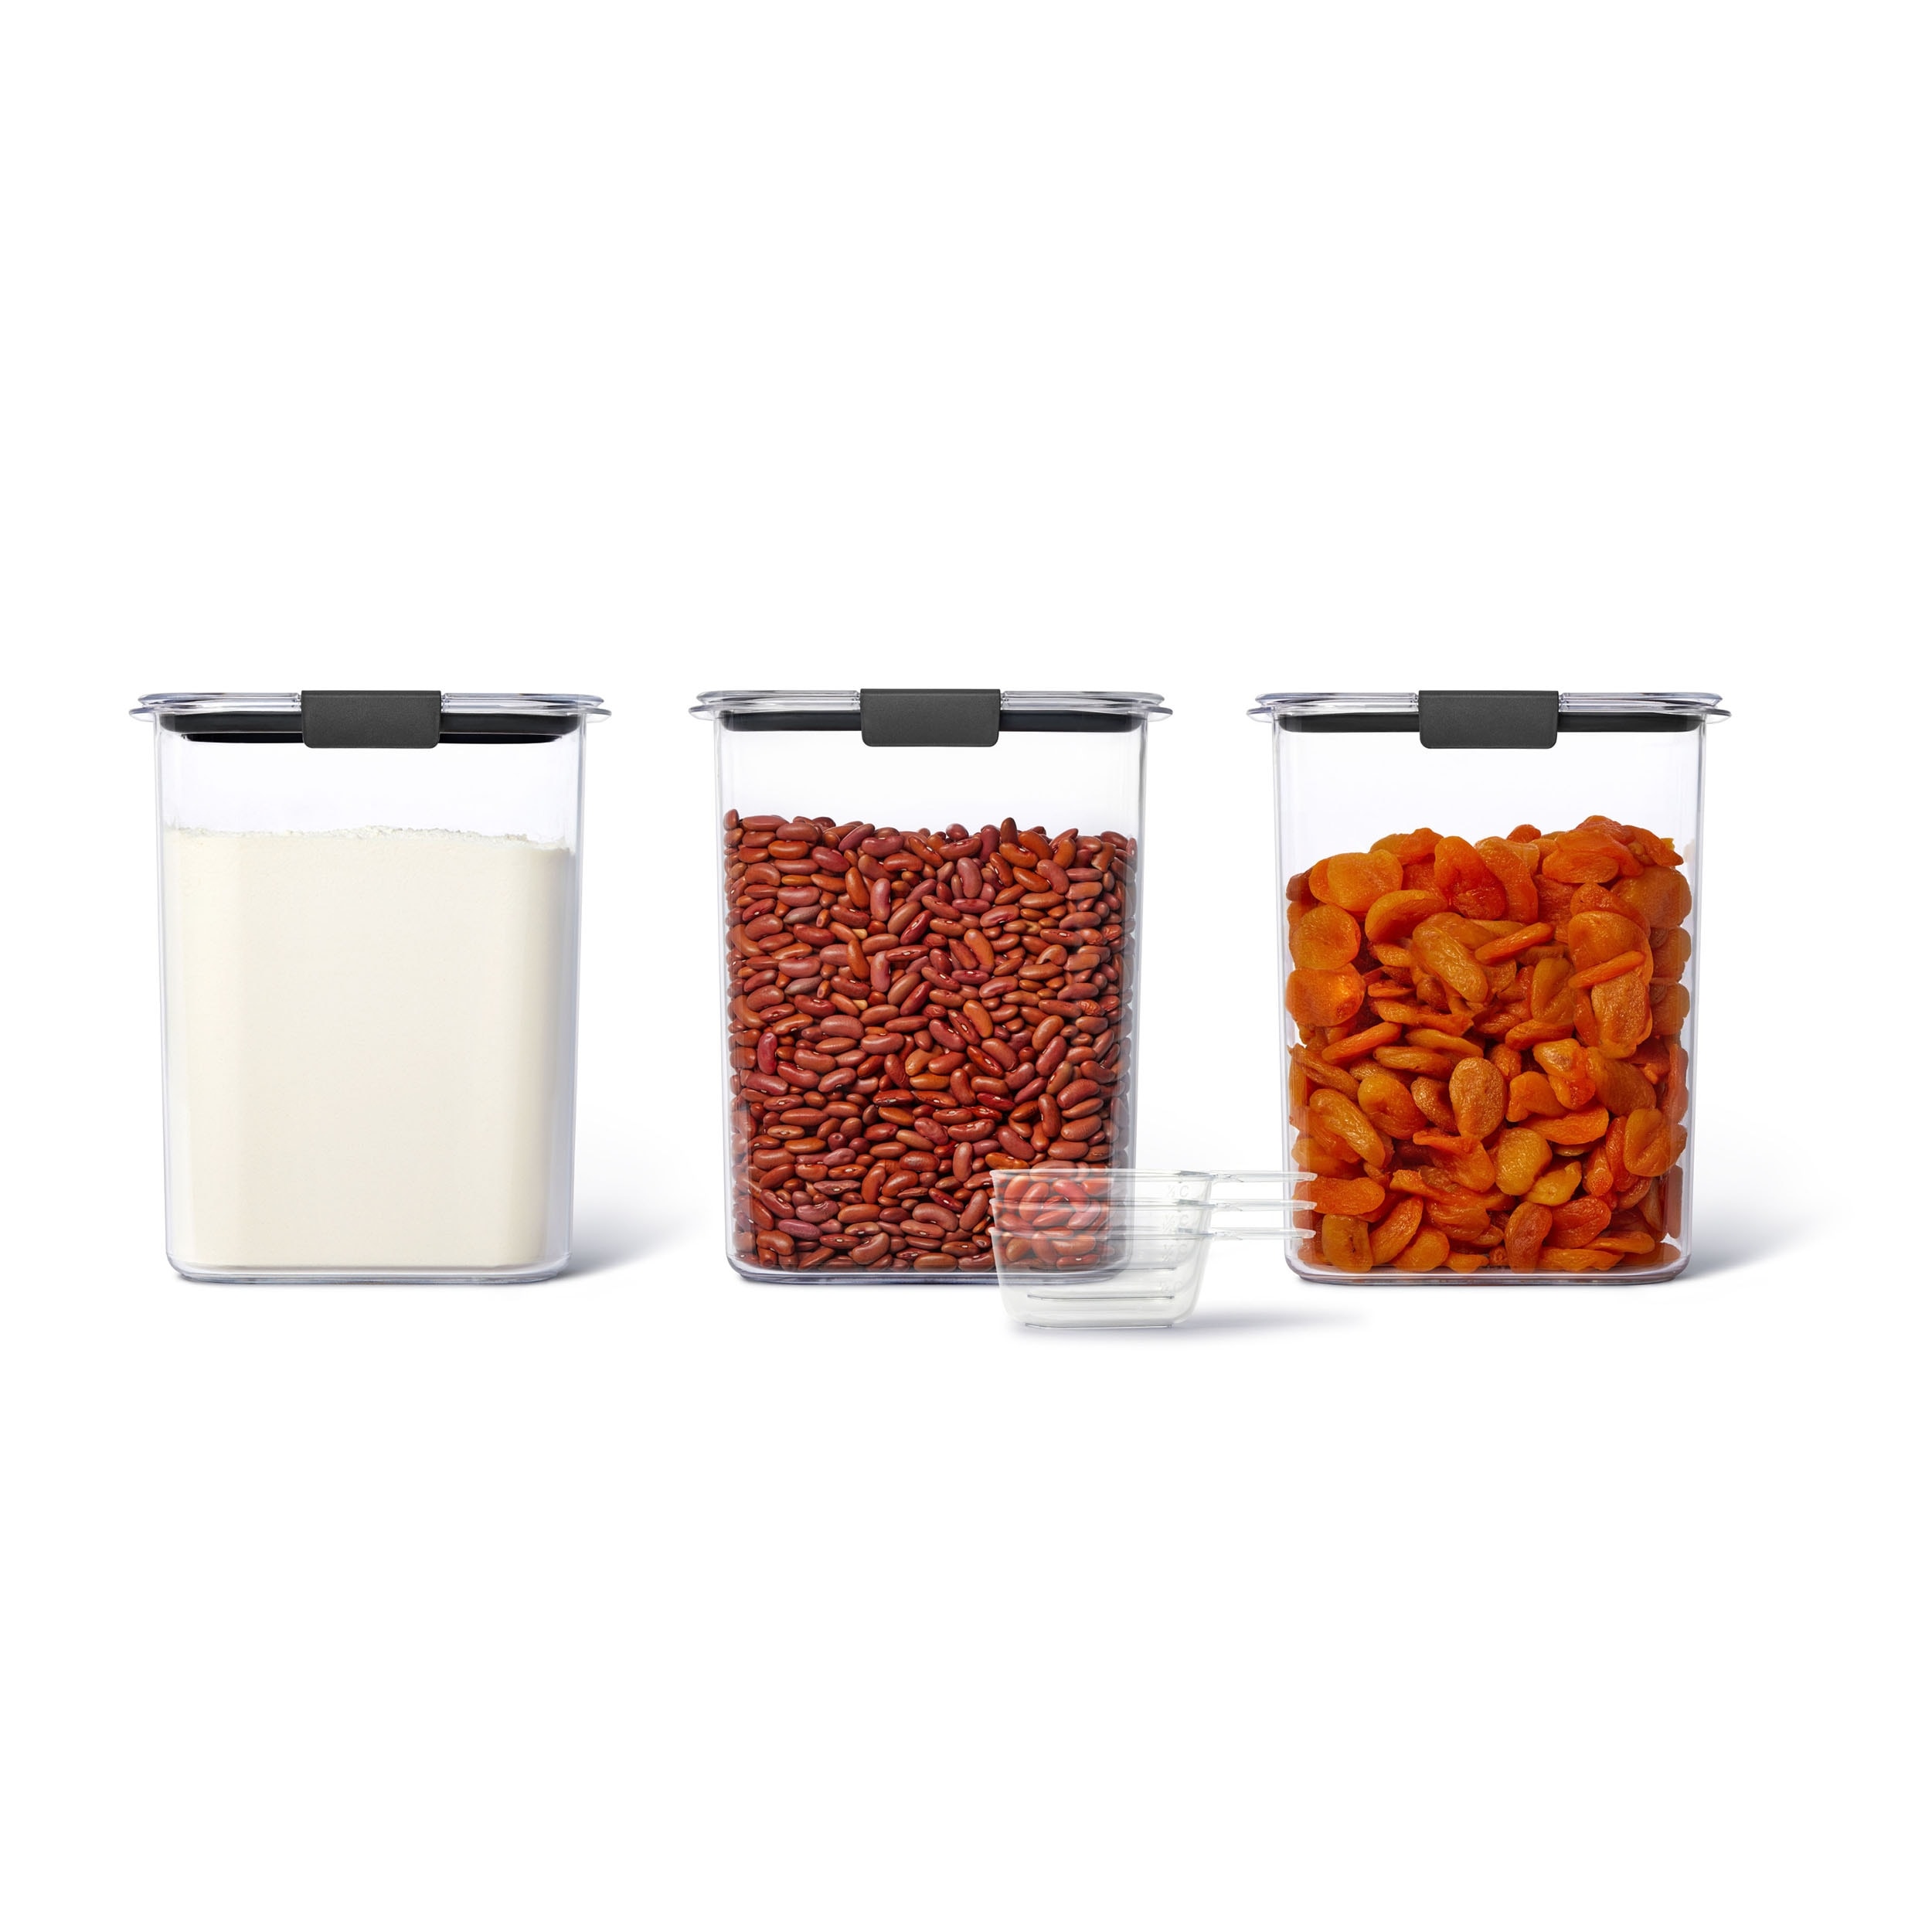 Rubbermaid Brilliance 7.8 cup Pantry Airtight Food Storage